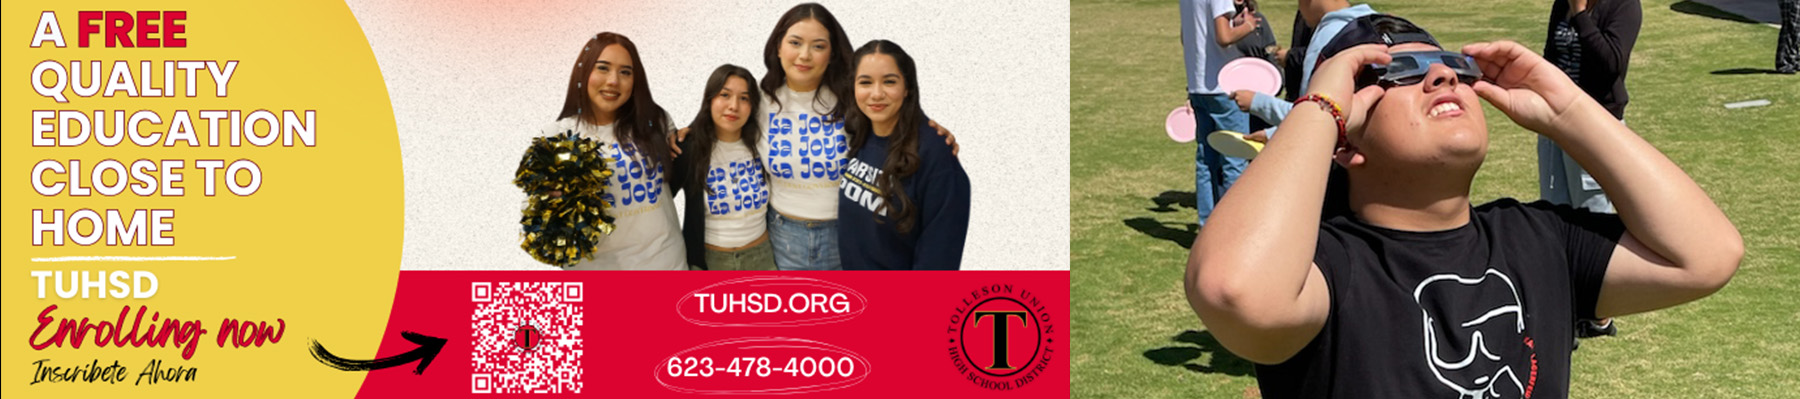 A free quality education close to home - TUHSD Enrolling now | Inscribete Ahora - tuhsd.org - 623-478-4000 | Students in the classroom